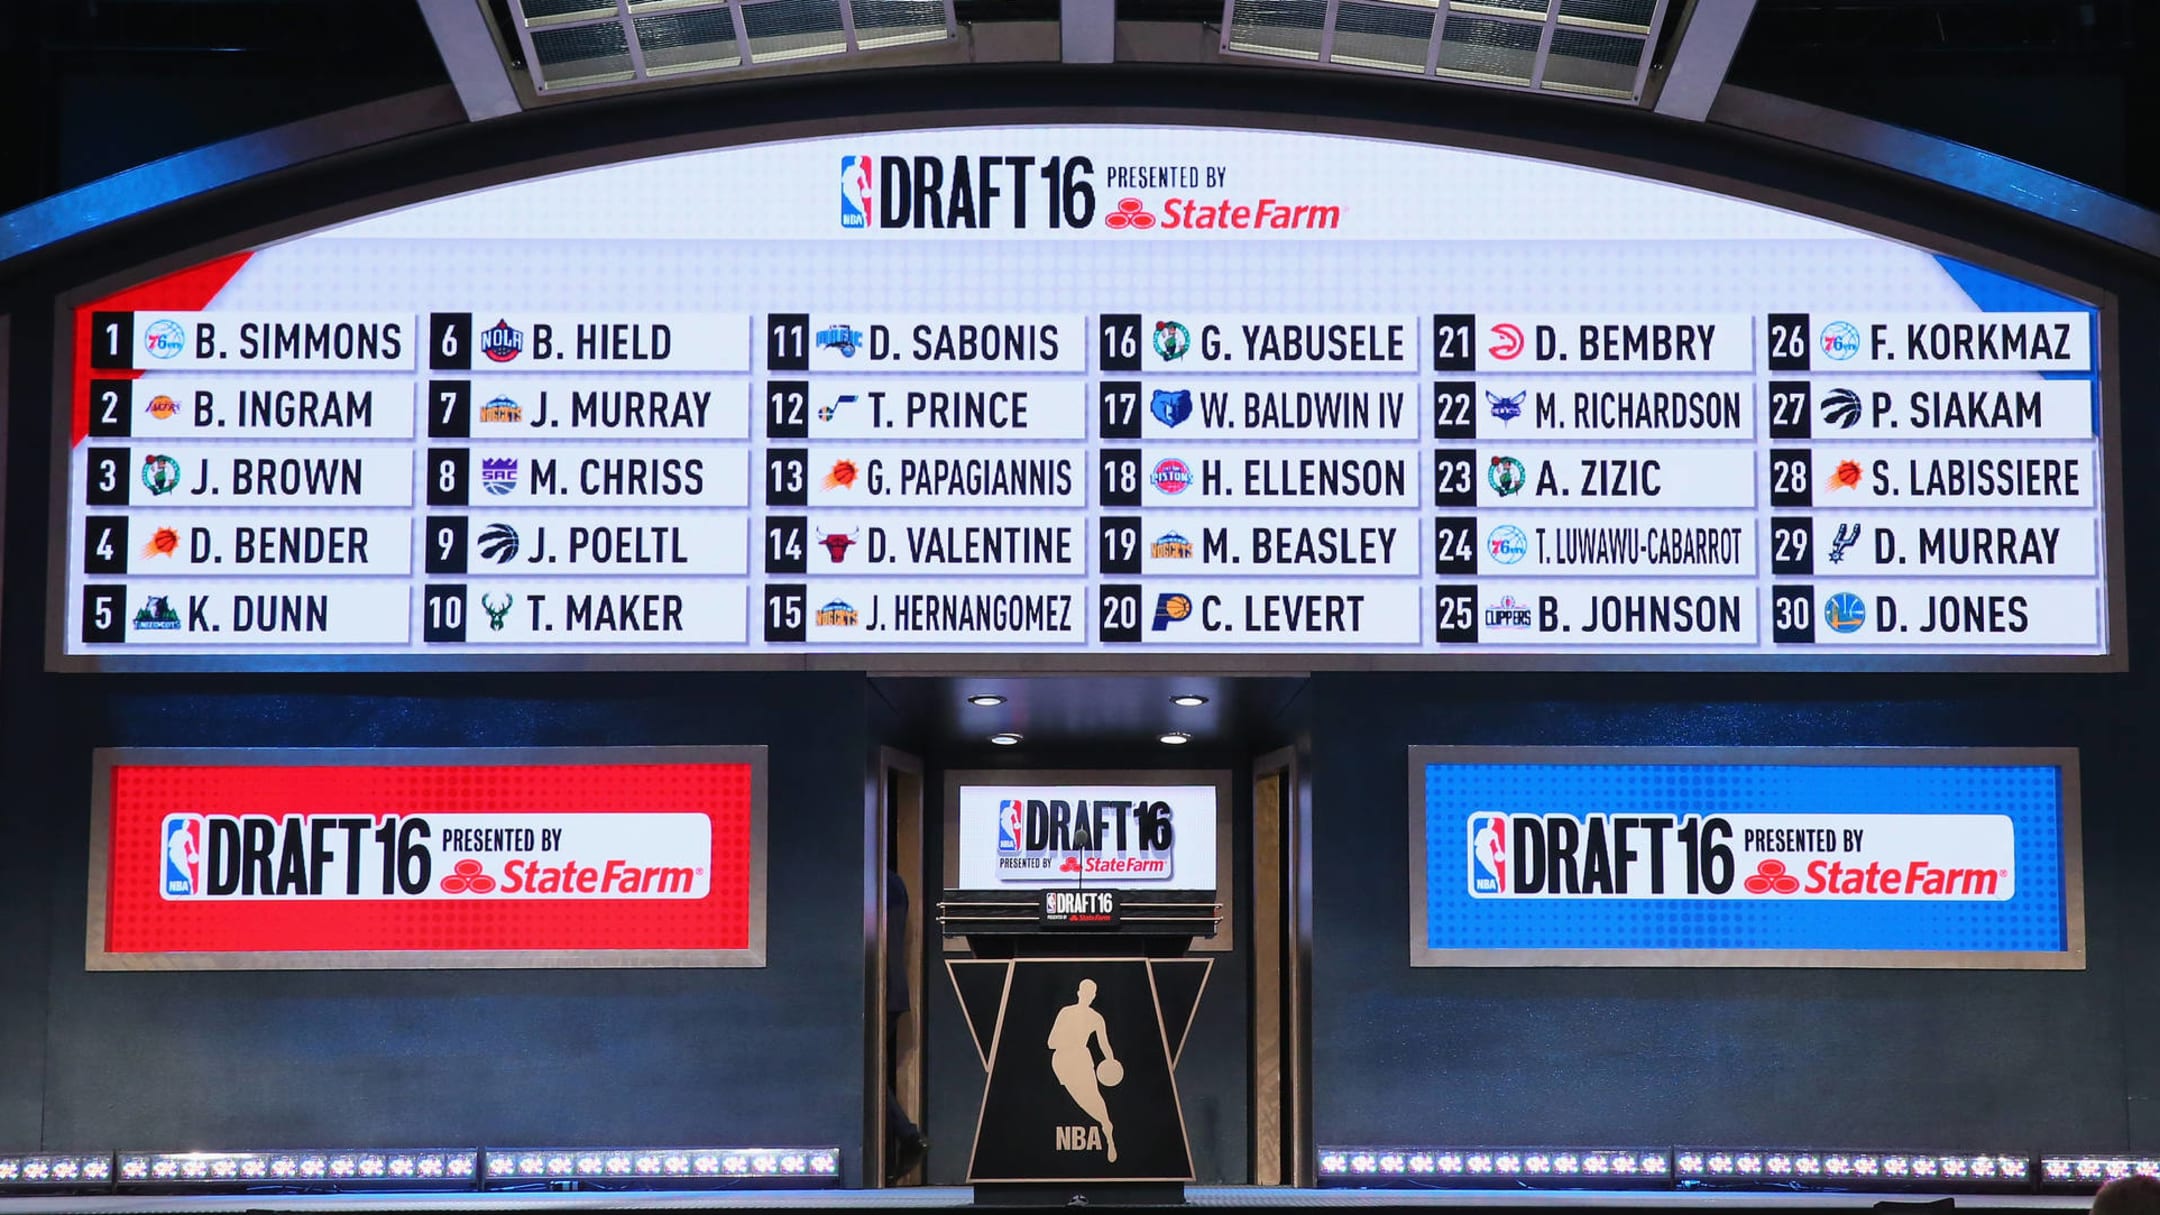 2019 NBA Re-Draft: The way it should have been